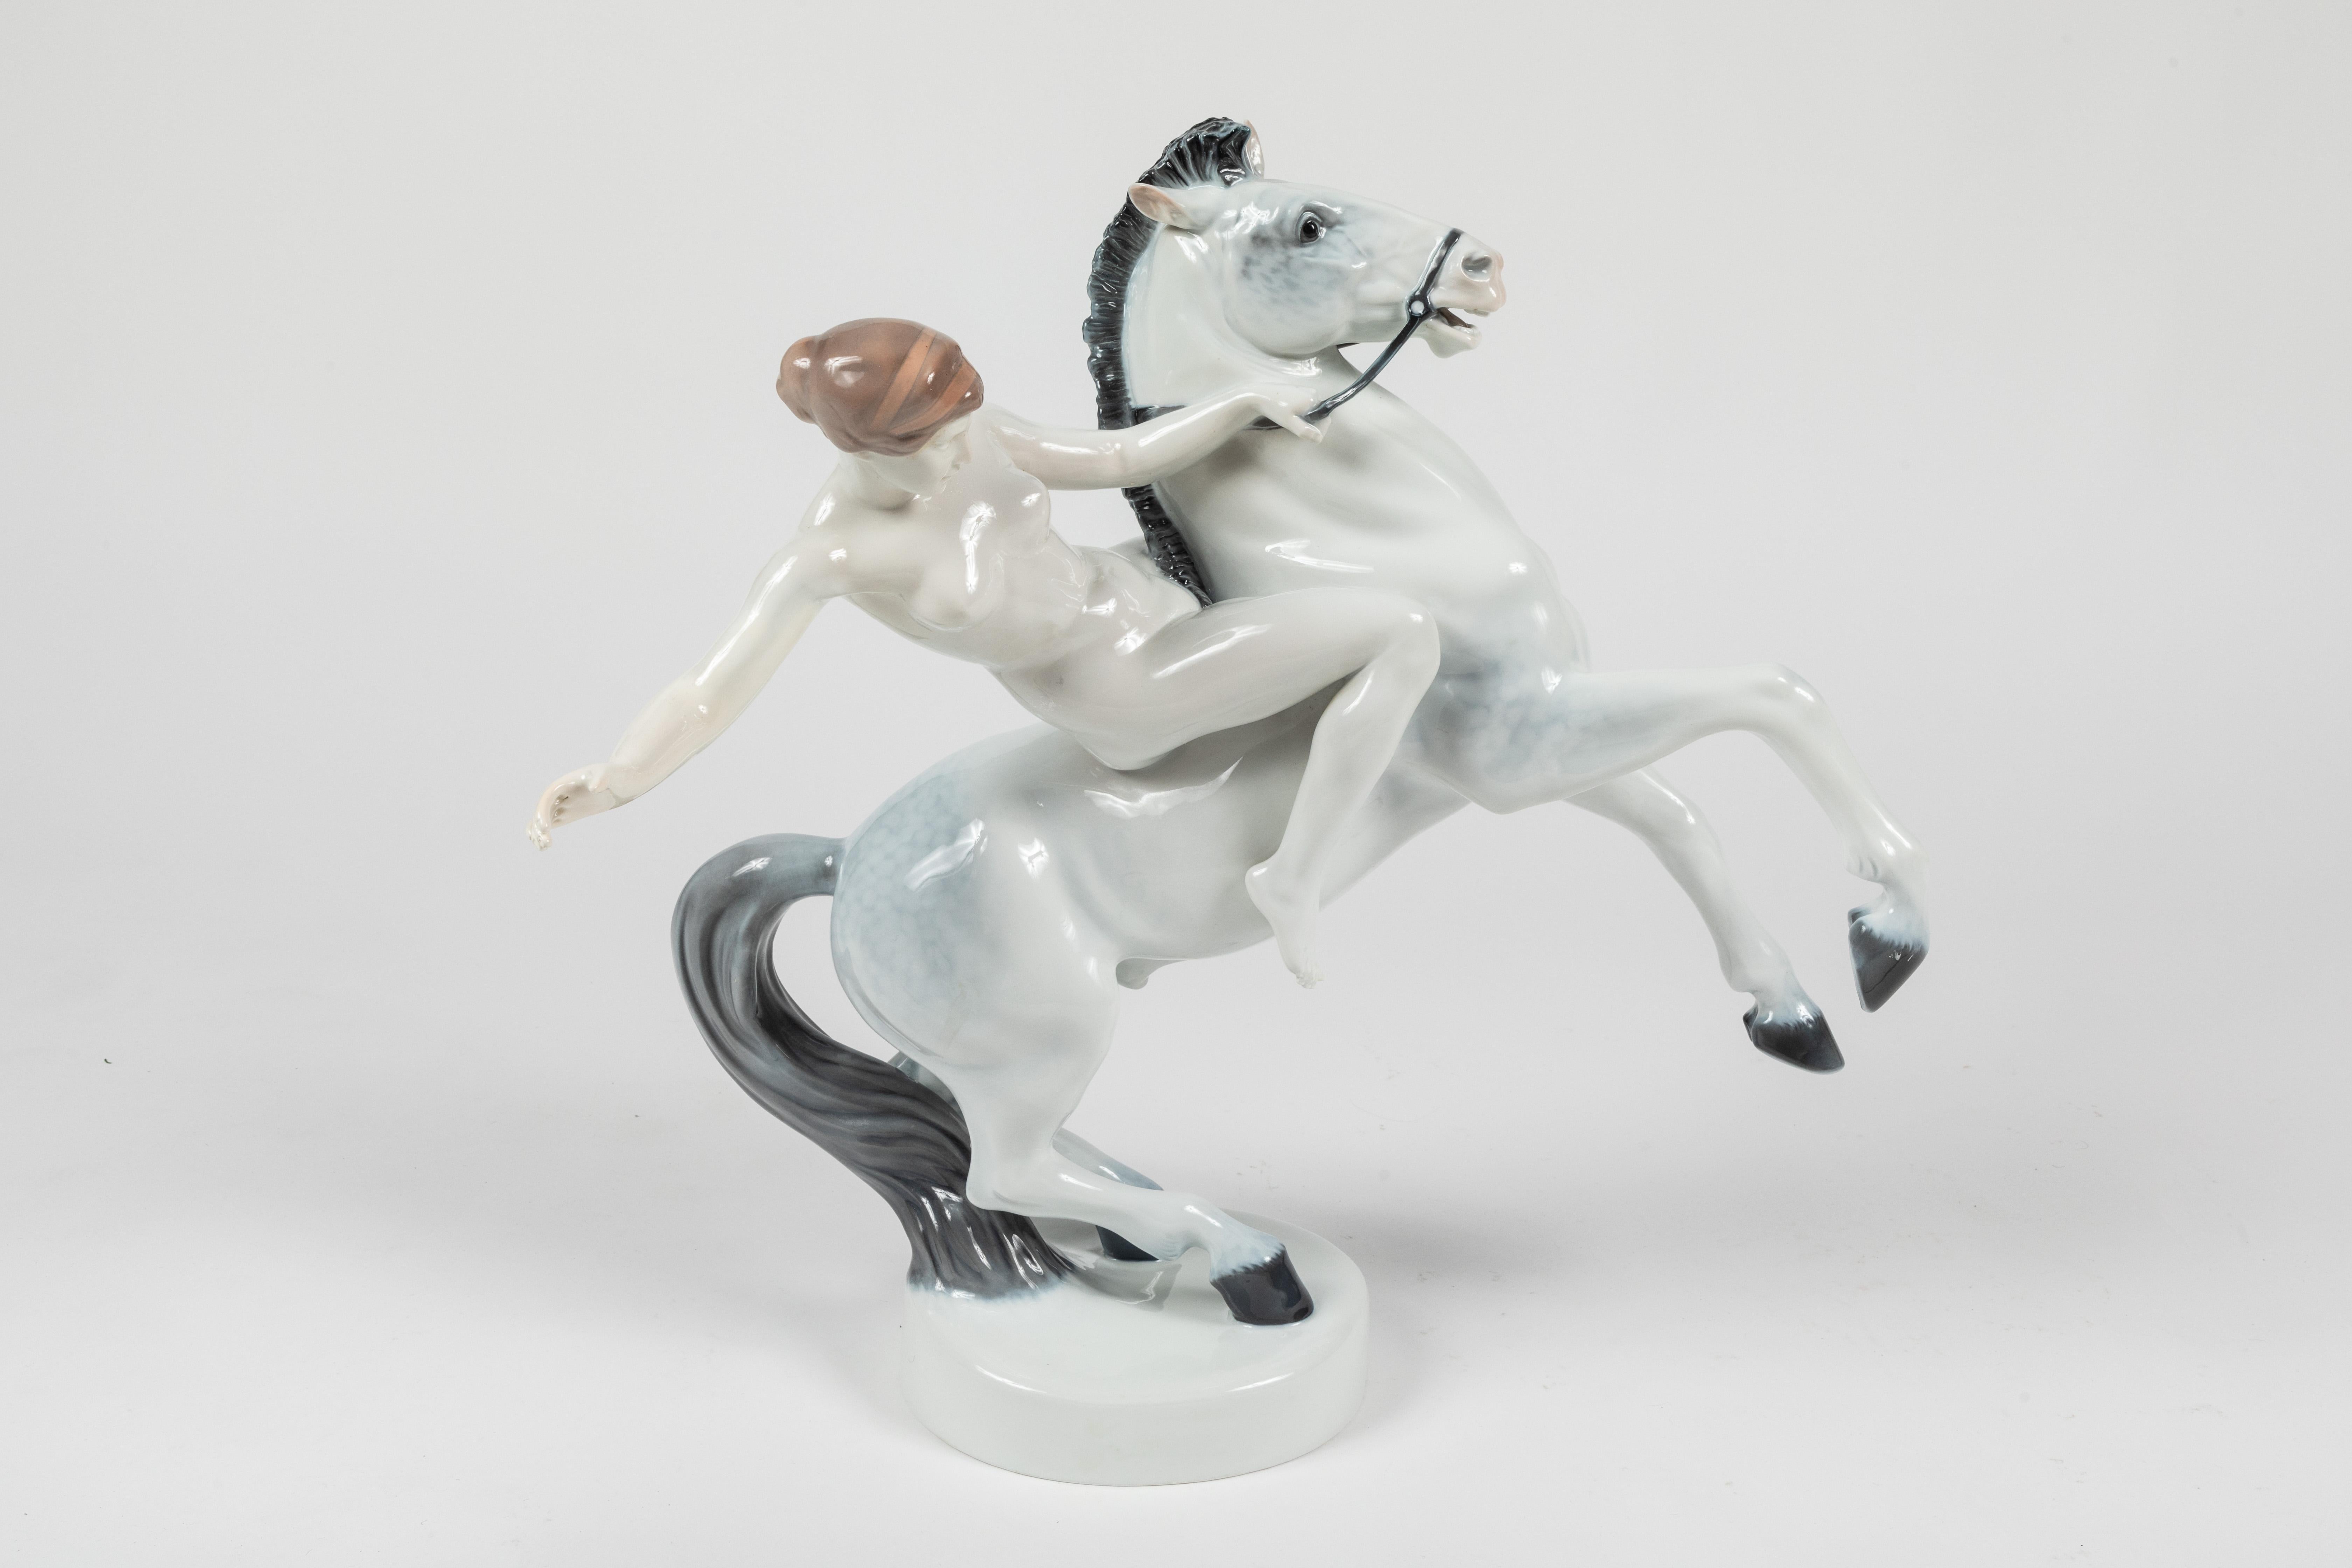 Designed by Anton Grath (born 1918) this large and impressive Rosenthal figure dates from 1934 and depicts a Female nude on a rising horse painted in a naturalistic underglaze painting. Embossed at the base 